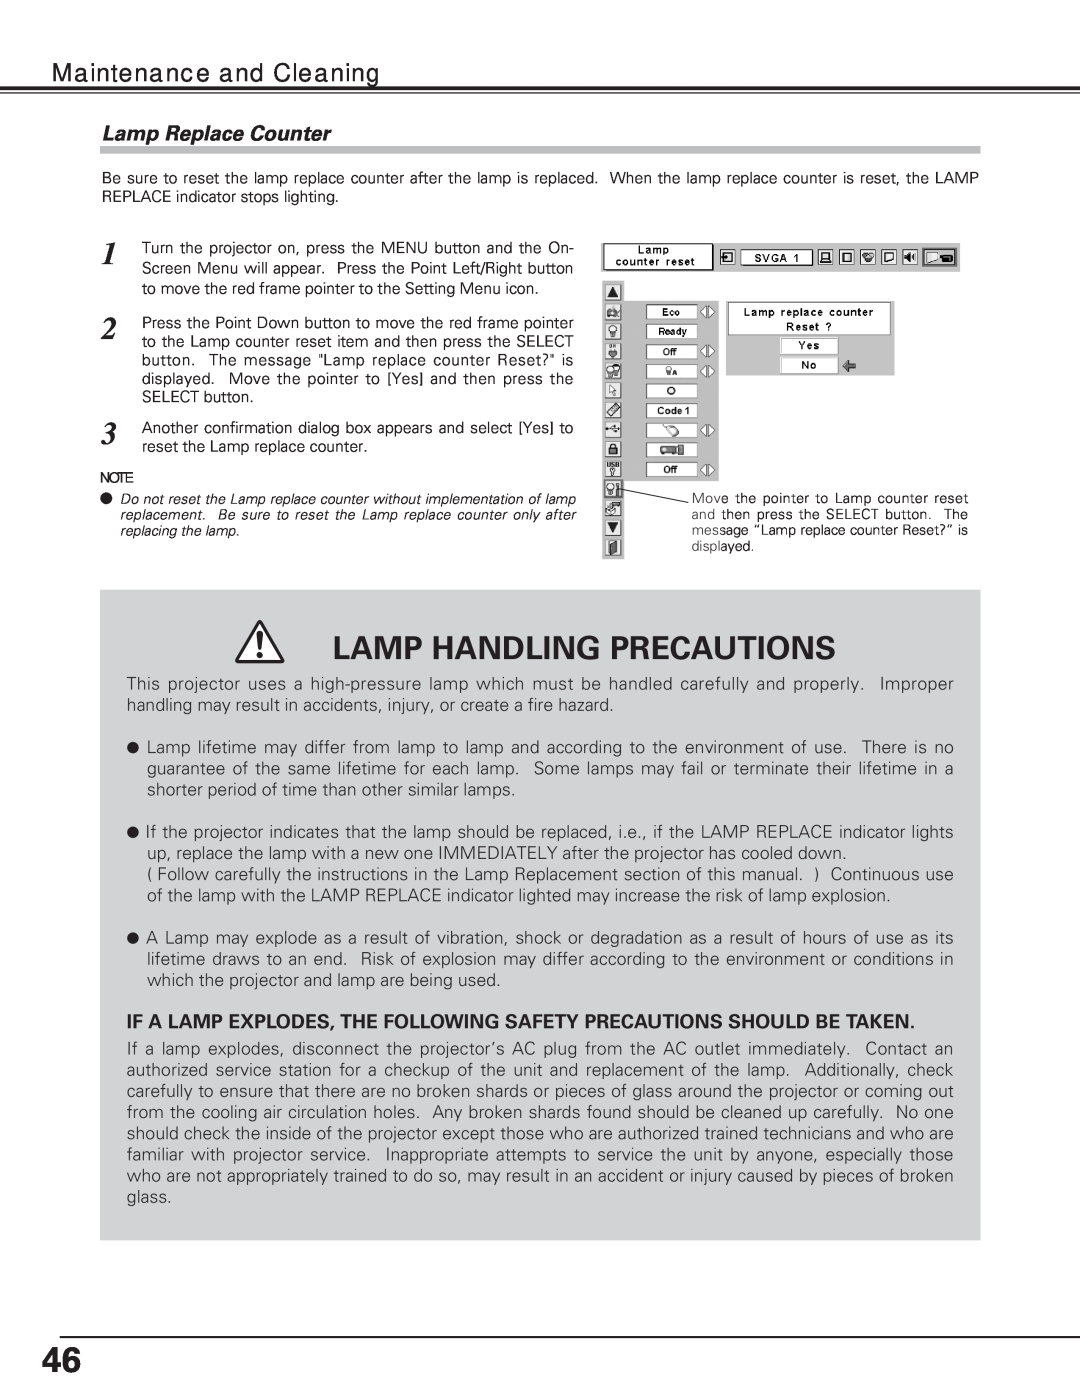 Eiki LC-XE10 instruction manual Lamp Replace Counter, Lamp Handling Precautions, Maintenance and Cleaning 